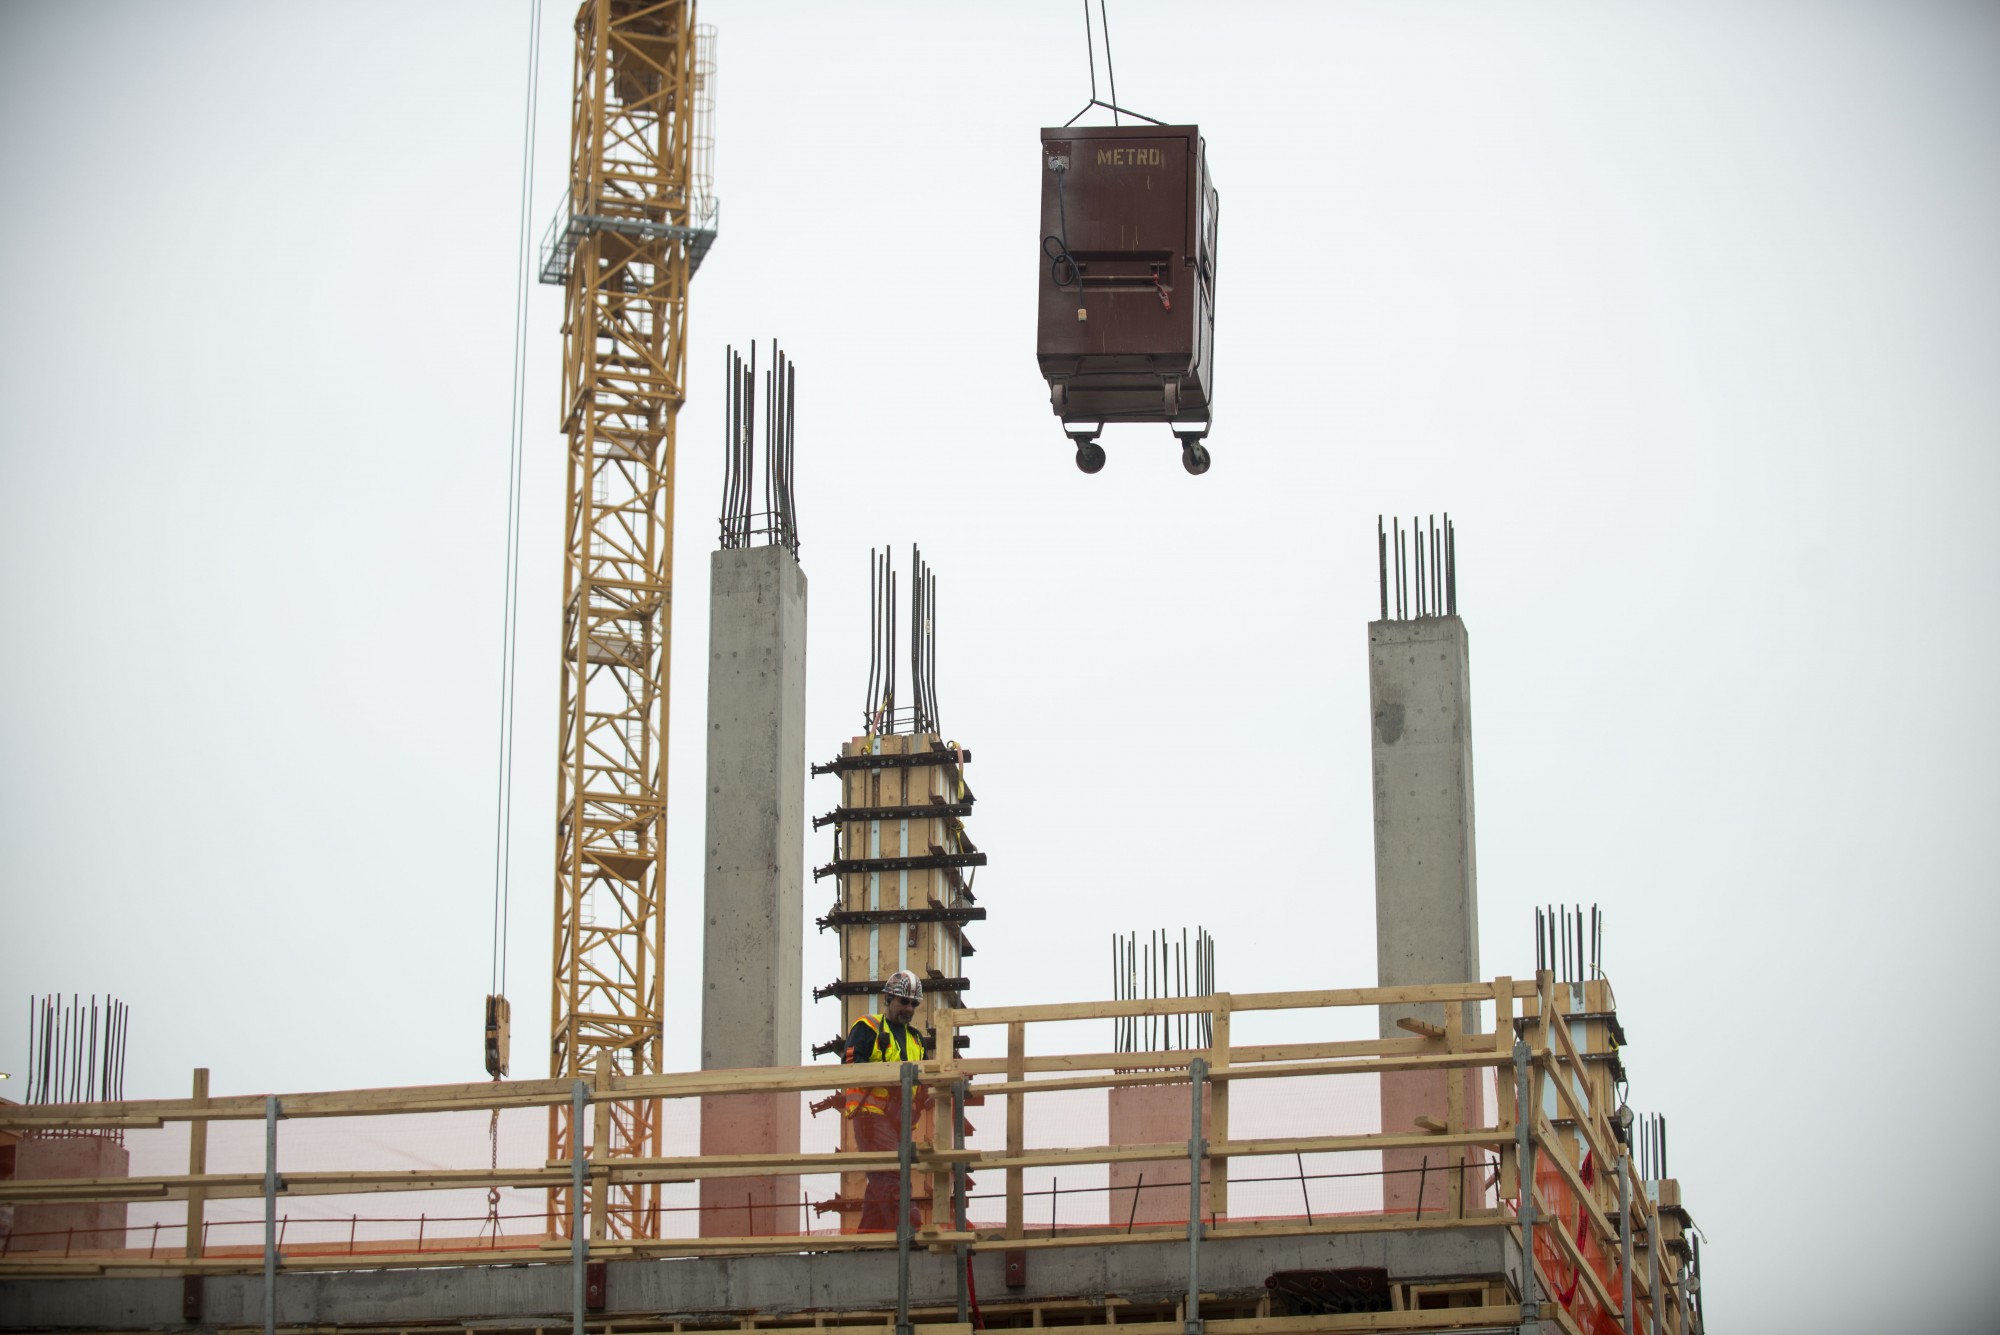 Construction is conducted in Minneapolis on Monday, April 6. Many developments could be put on hold as policymakers try to decrease COVID-19’s spread.